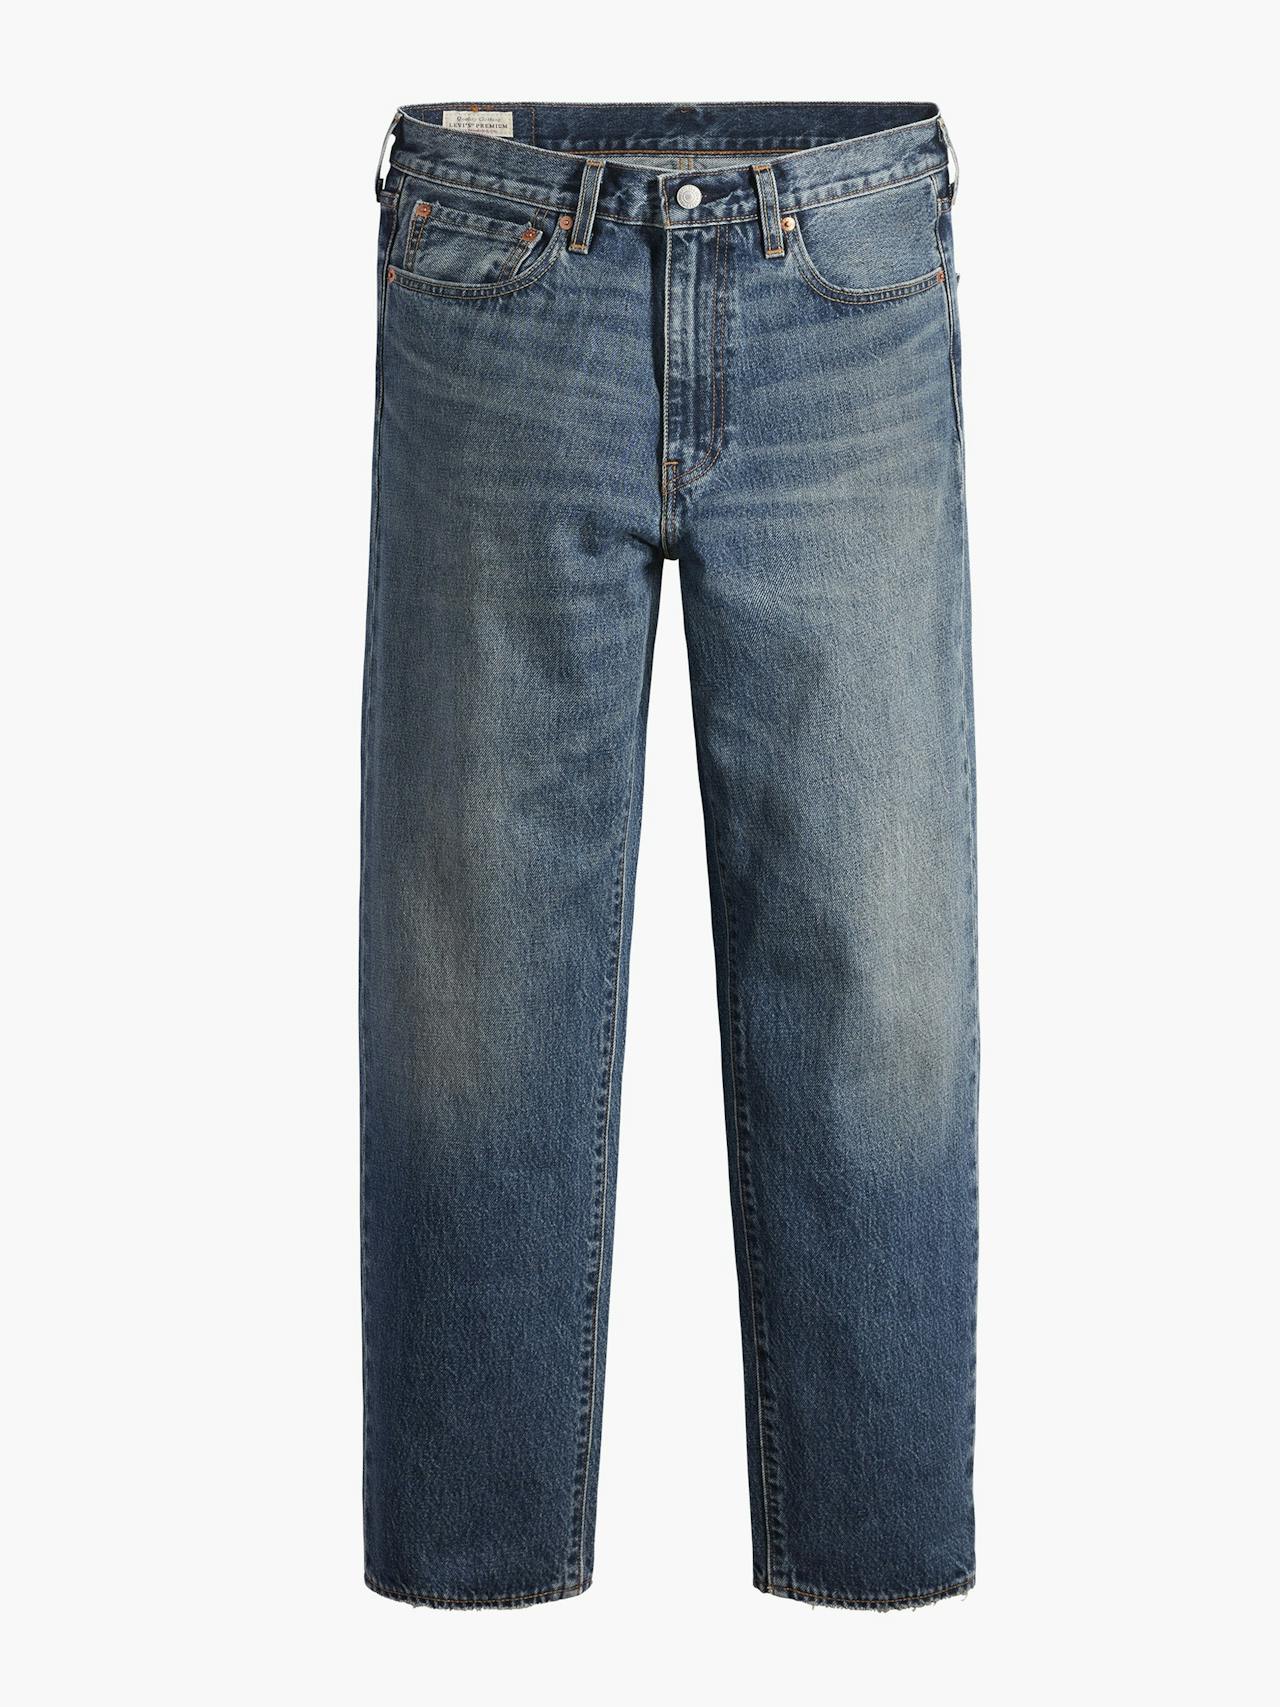 Mens 568™ stay loose jeans